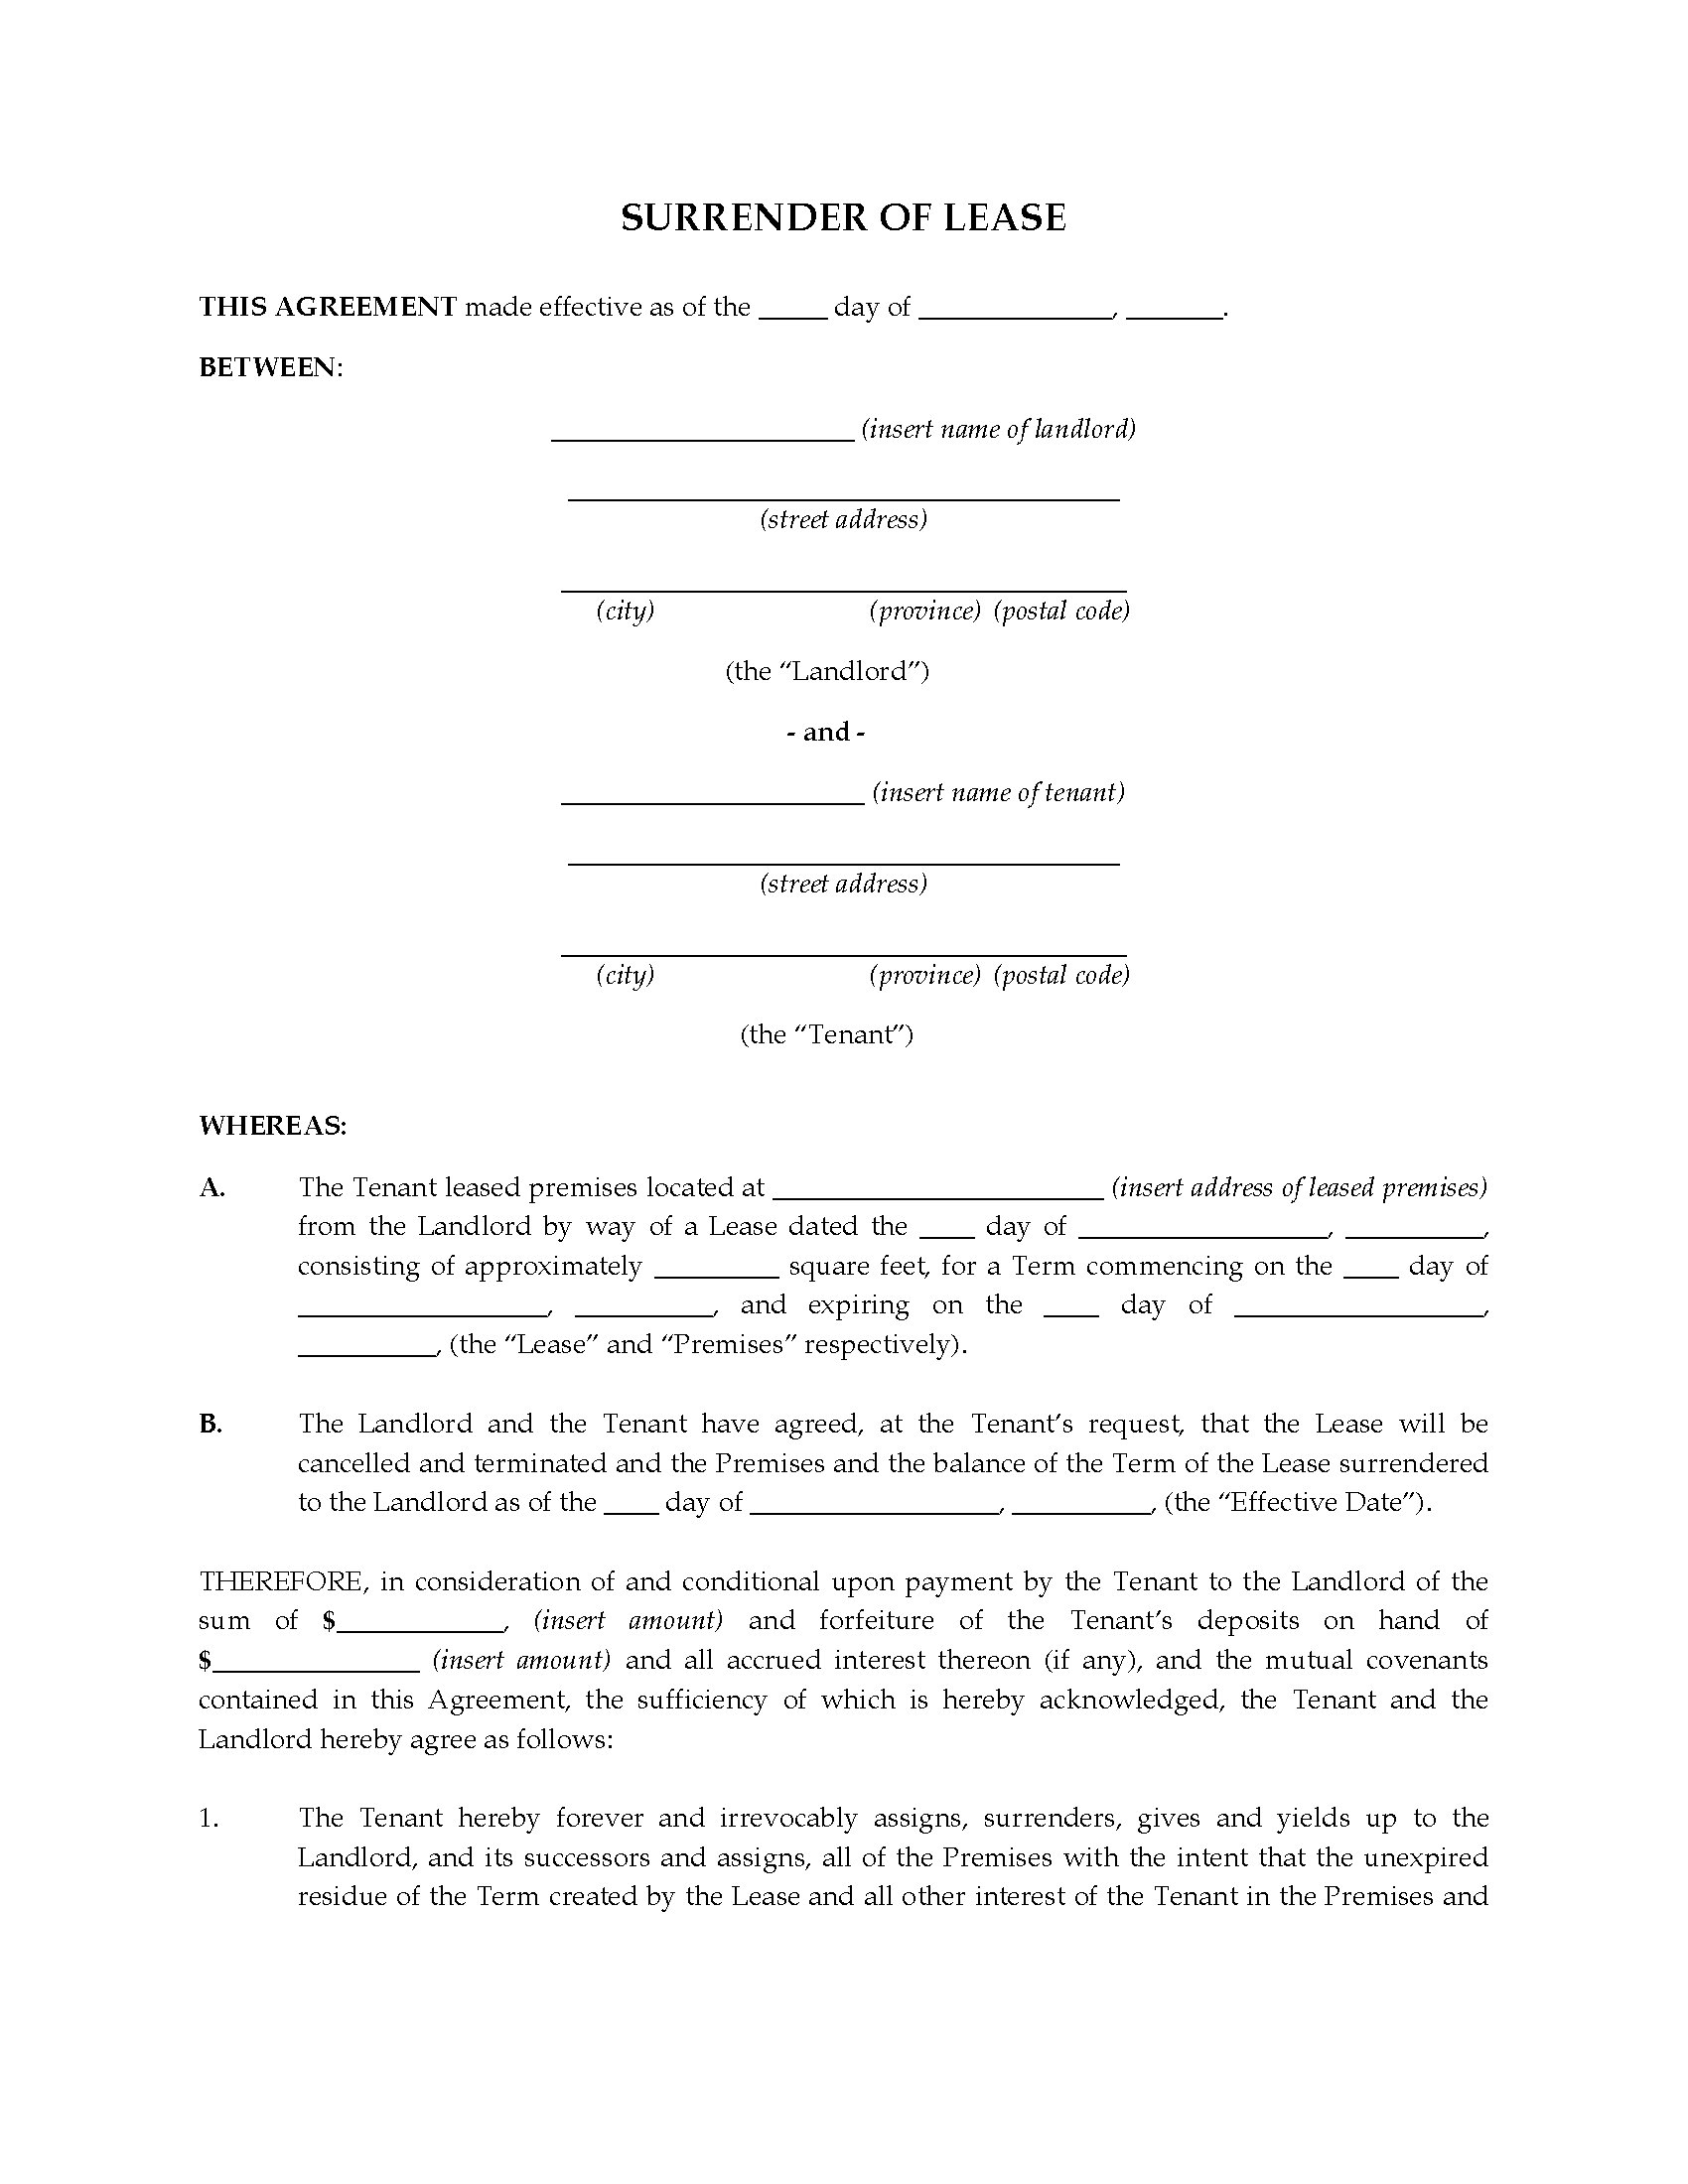 Canada Surrender of Commercial Lease  Legal Forms and Business Regarding surrender of lease agreement template